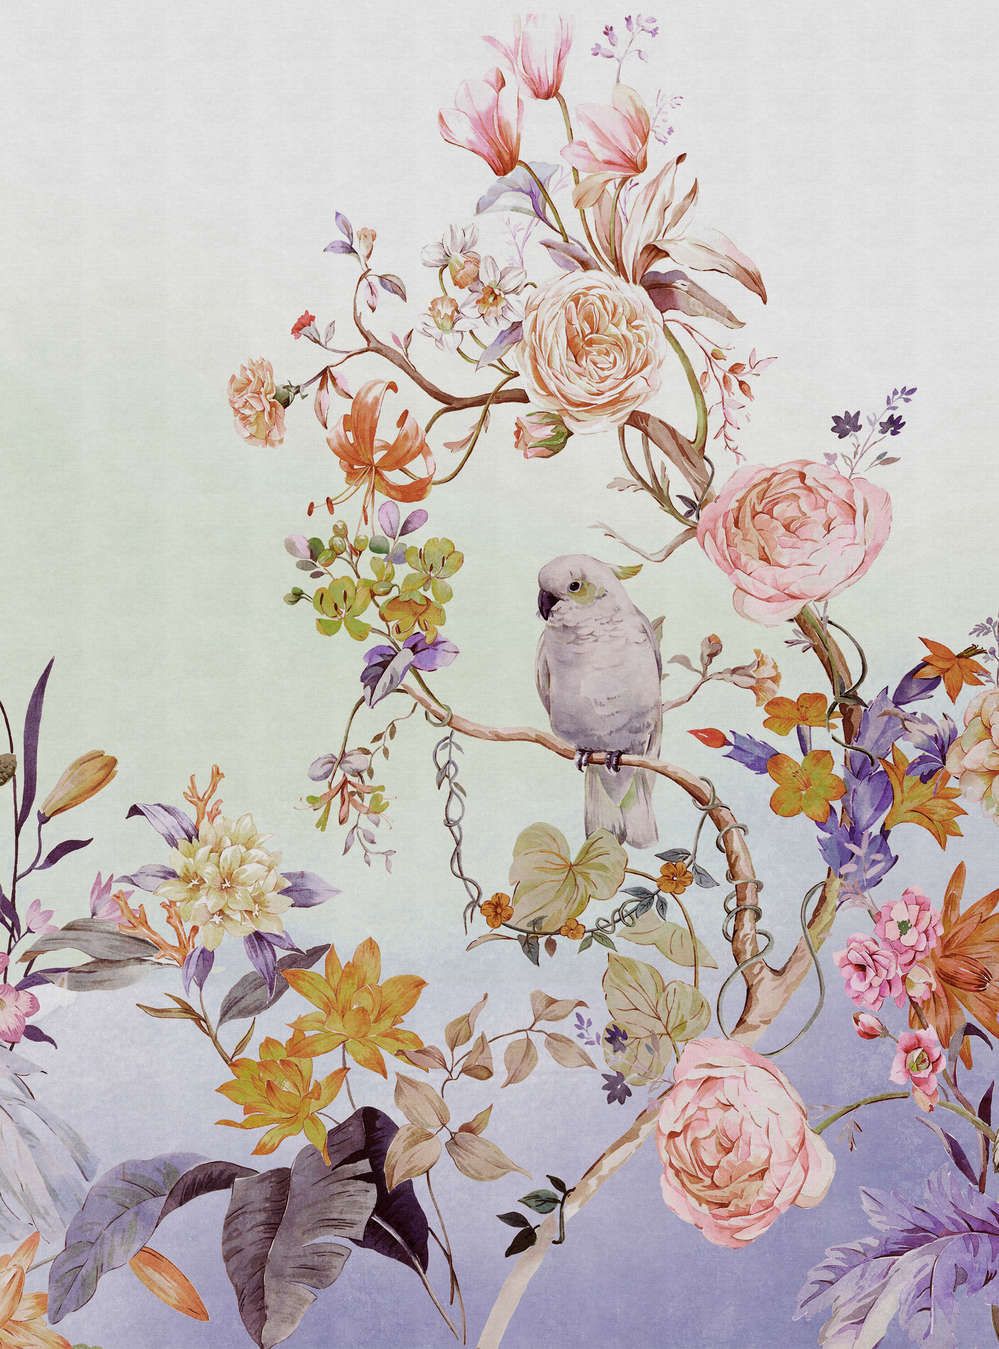             Photo wallpaper »paradise« - Bird & flowers with colour gradient and linen texture in the background - Colourful | Smooth, slightly pearlescent non-woven fabric
        